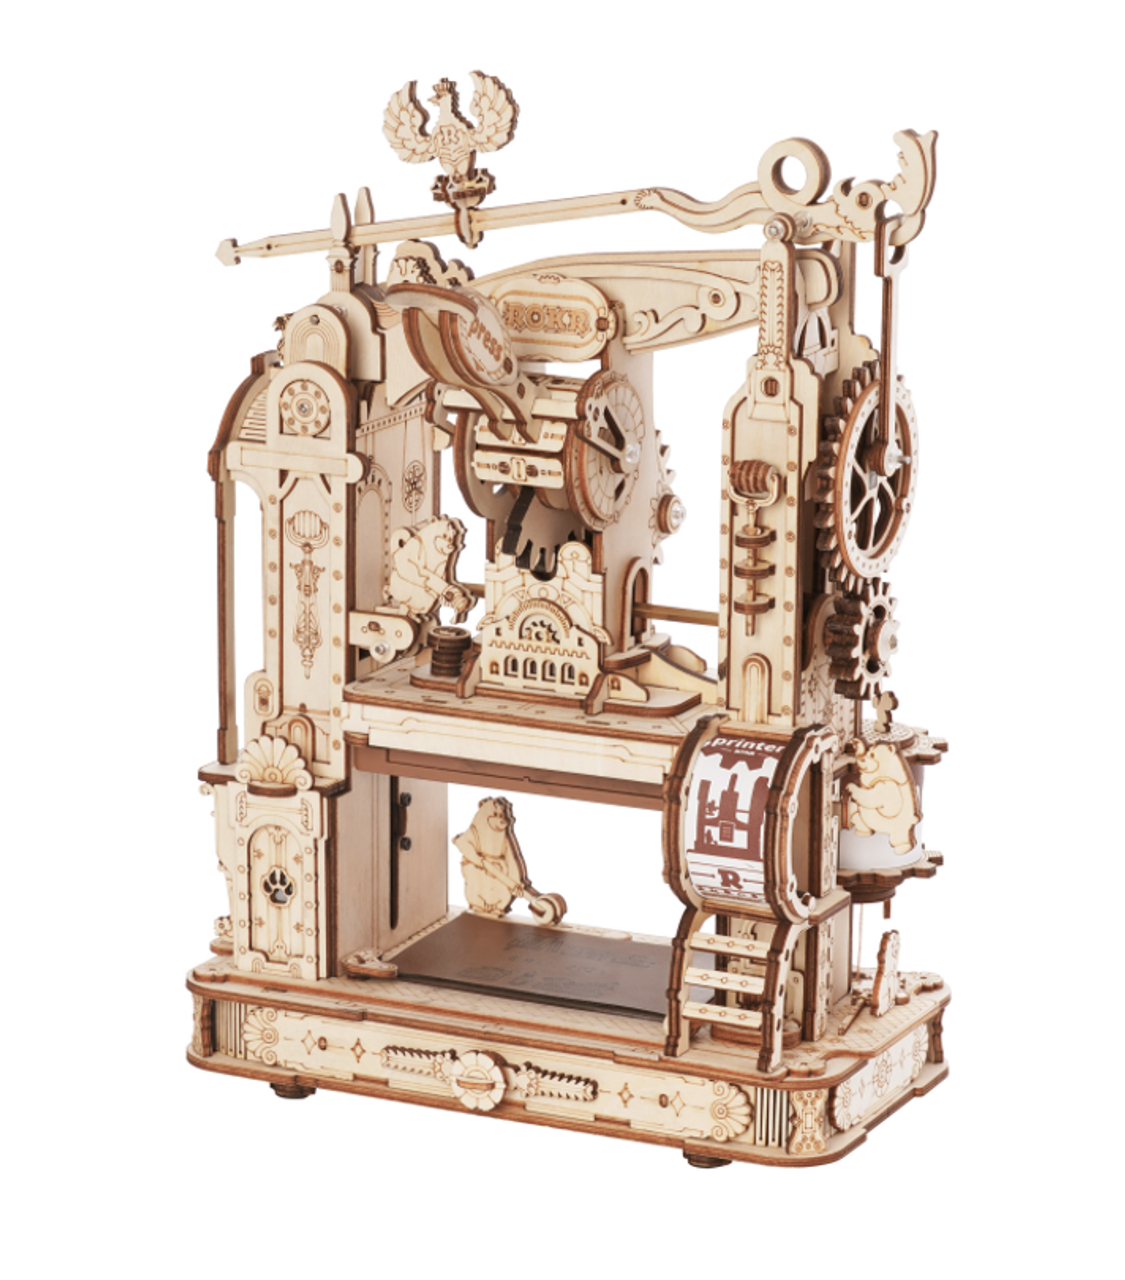 ROKR LK602 Printing Press 3D Wooden Puzzle Mechanical Kit Adult DIY Toy  XmasGift